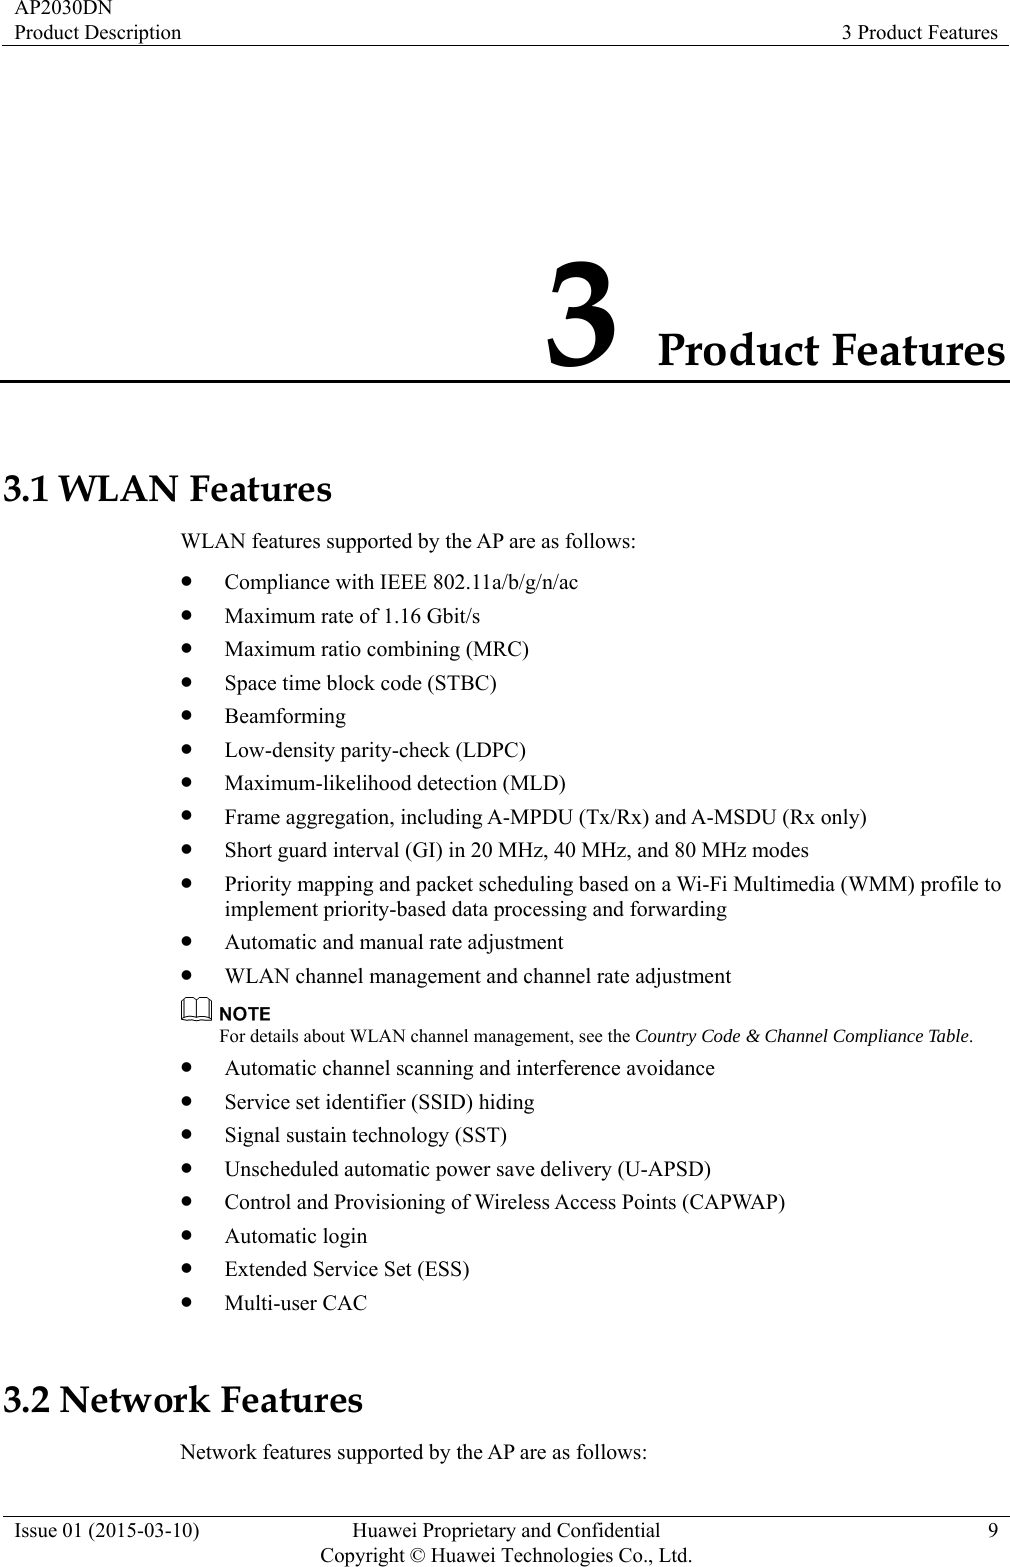 AP2030DN Product Description  3 Product Features Issue 01 (2015-03-10)  Huawei Proprietary and Confidential         Copyright © Huawei Technologies Co., Ltd.9 3 Product Features 3.1 WLAN Features WLAN features supported by the AP are as follows: z Compliance with IEEE 802.11a/b/g/n/ac z Maximum rate of 1.16 Gbit/s z Maximum ratio combining (MRC) z Space time block code (STBC) z Beamforming z Low-density parity-check (LDPC) z Maximum-likelihood detection (MLD) z Frame aggregation, including A-MPDU (Tx/Rx) and A-MSDU (Rx only) z Short guard interval (GI) in 20 MHz, 40 MHz, and 80 MHz modes z Priority mapping and packet scheduling based on a Wi-Fi Multimedia (WMM) profile to implement priority-based data processing and forwarding z Automatic and manual rate adjustment z WLAN channel management and channel rate adjustment  For details about WLAN channel management, see the Country Code &amp; Channel Compliance Table. z Automatic channel scanning and interference avoidance z Service set identifier (SSID) hiding z Signal sustain technology (SST) z Unscheduled automatic power save delivery (U-APSD) z Control and Provisioning of Wireless Access Points (CAPWAP) z Automatic login z Extended Service Set (ESS) z Multi-user CAC 3.2 Network Features Network features supported by the AP are as follows: 